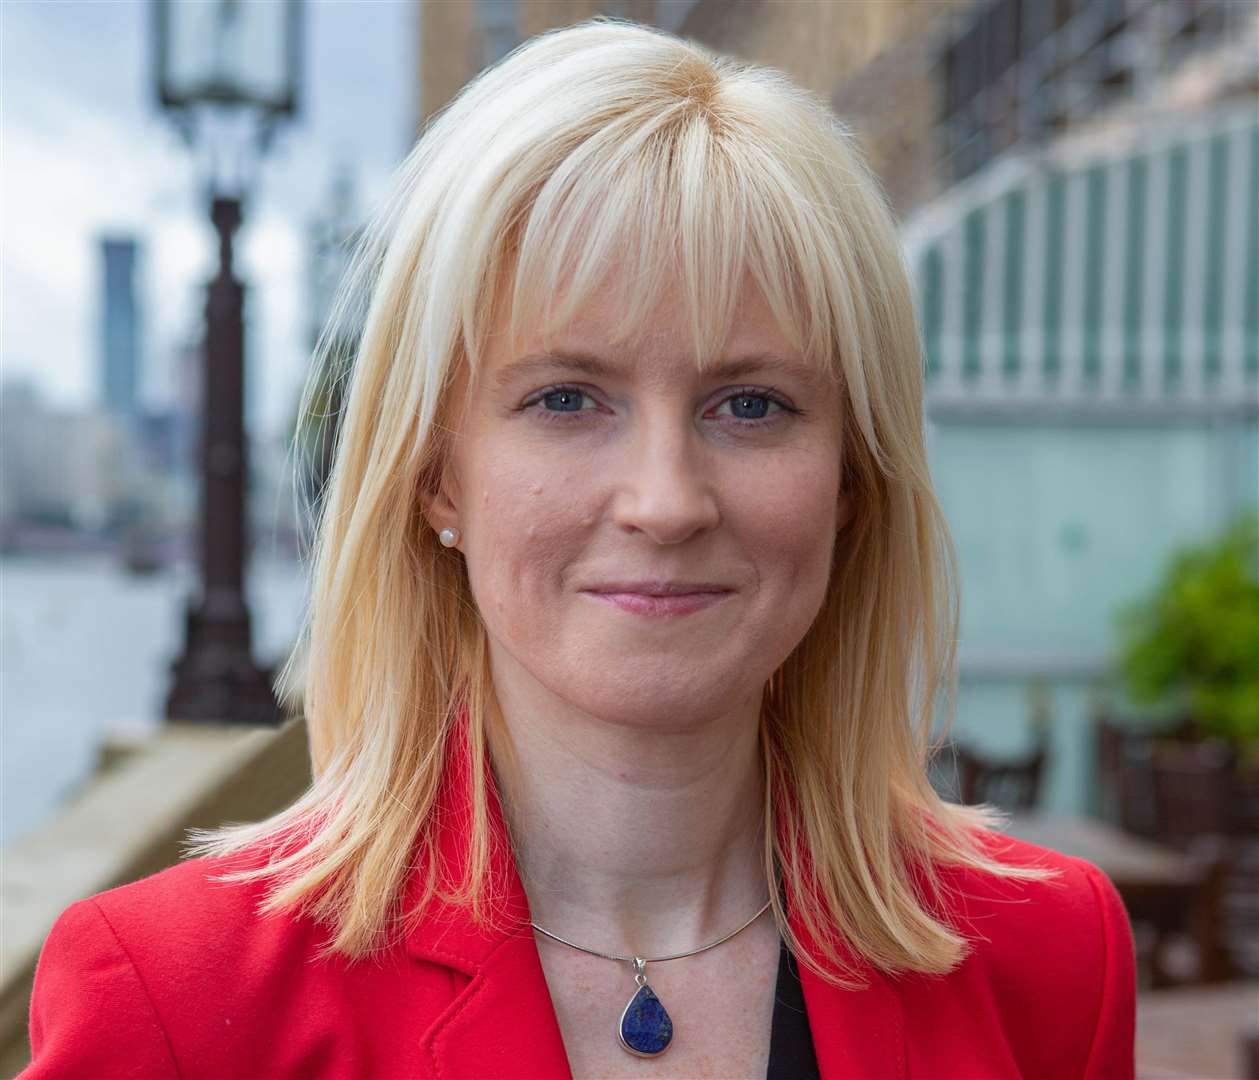 Labour MP Rosie Duffield, who represents Canterbury and Whitstable, says she is not transphobic as she said it is not her place to speak on trans issues